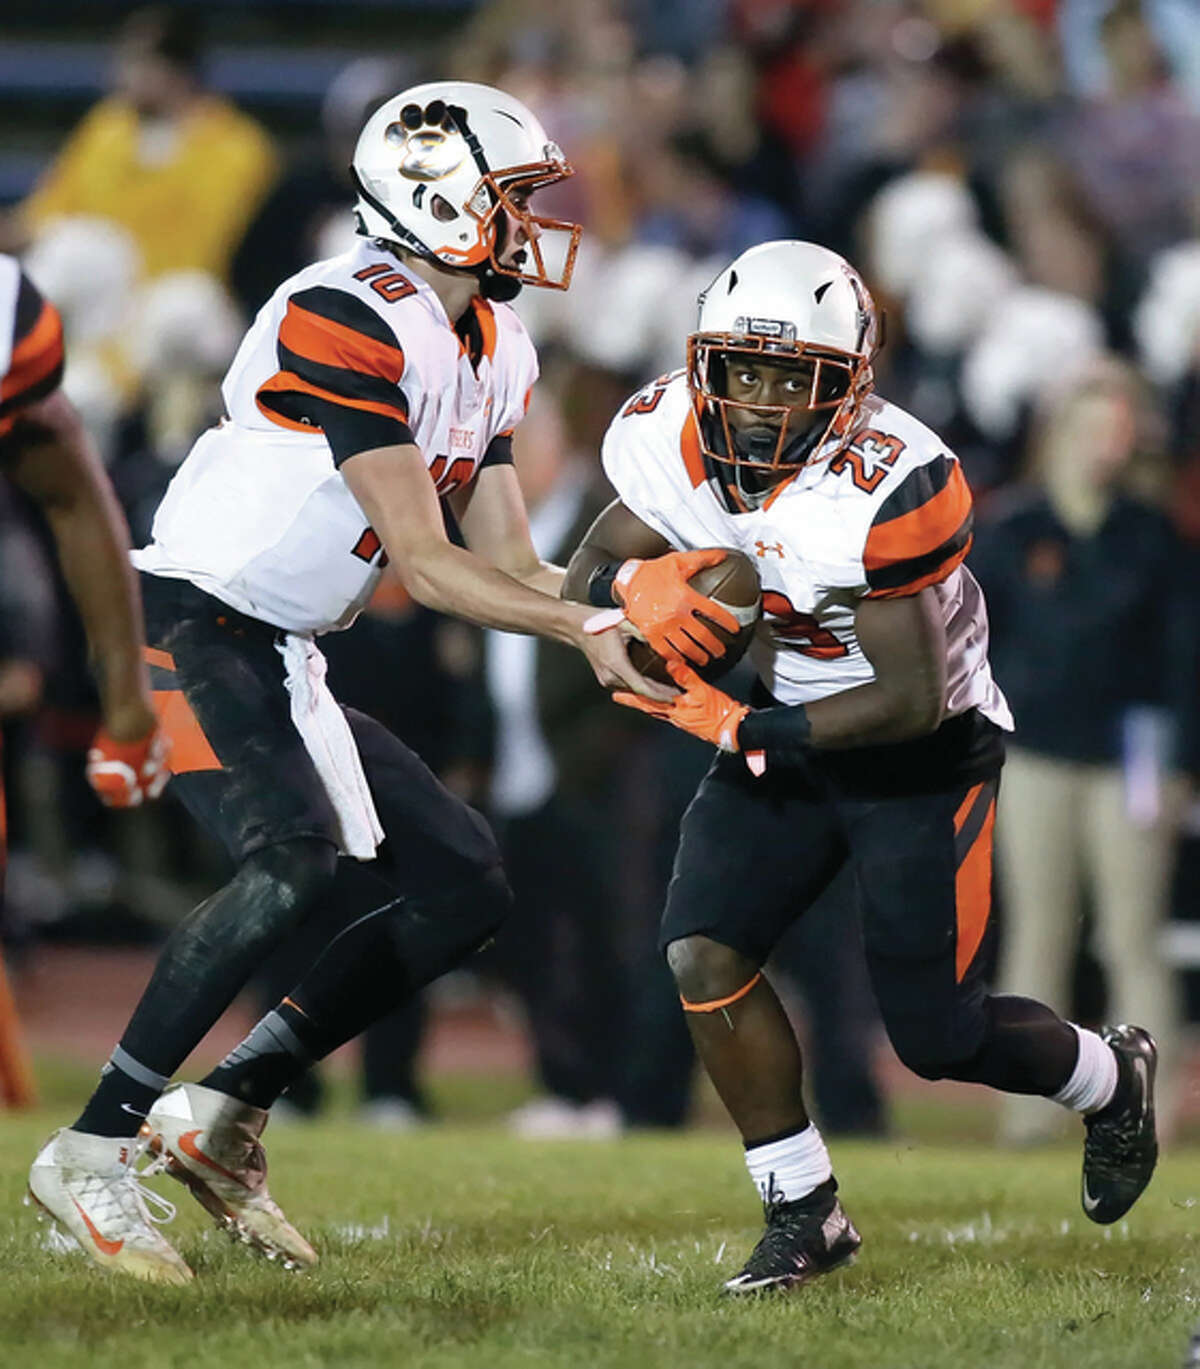 Edwardsville QB Brenden Dickmann (left) hands off to running back Dionte Rodgers on Friday night in Alton. Rodgers, a sophomore, finished with 211 rushing yards and three touchdowns from 16 carries.